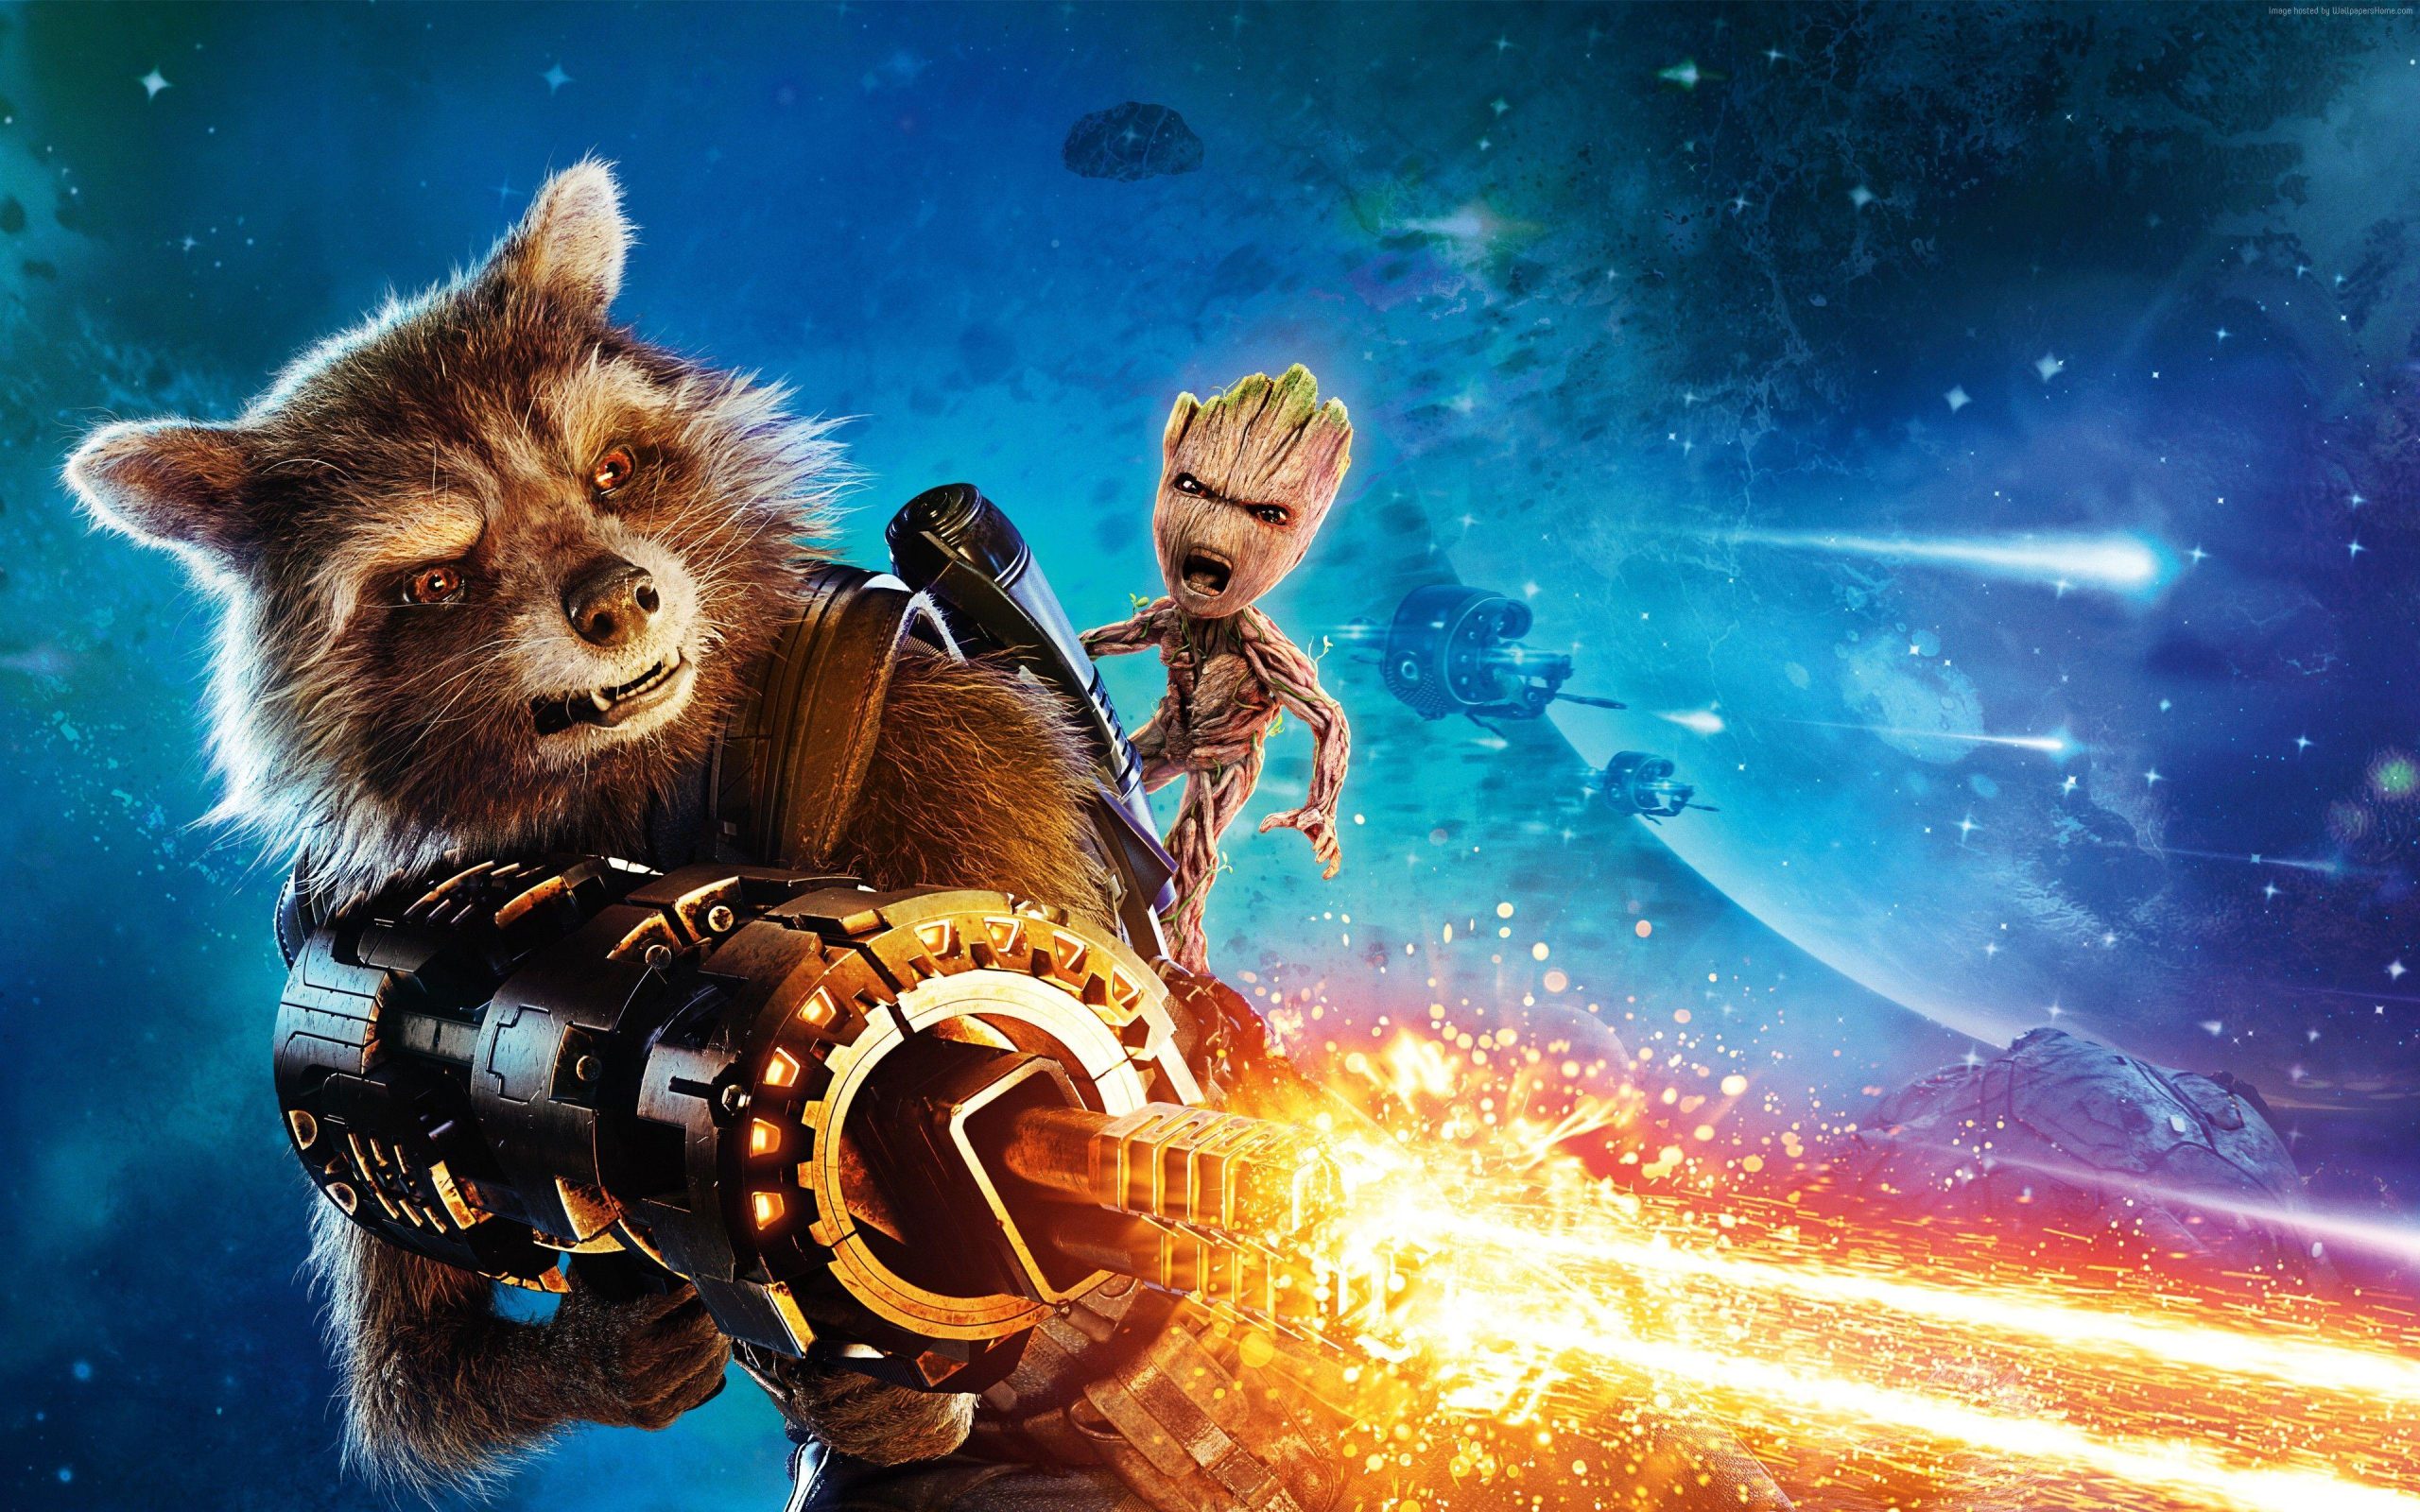 Guardians Of The Galaxy Character Posters cool wallpaper, Guardians Of The Galaxy Character Posters, Movies